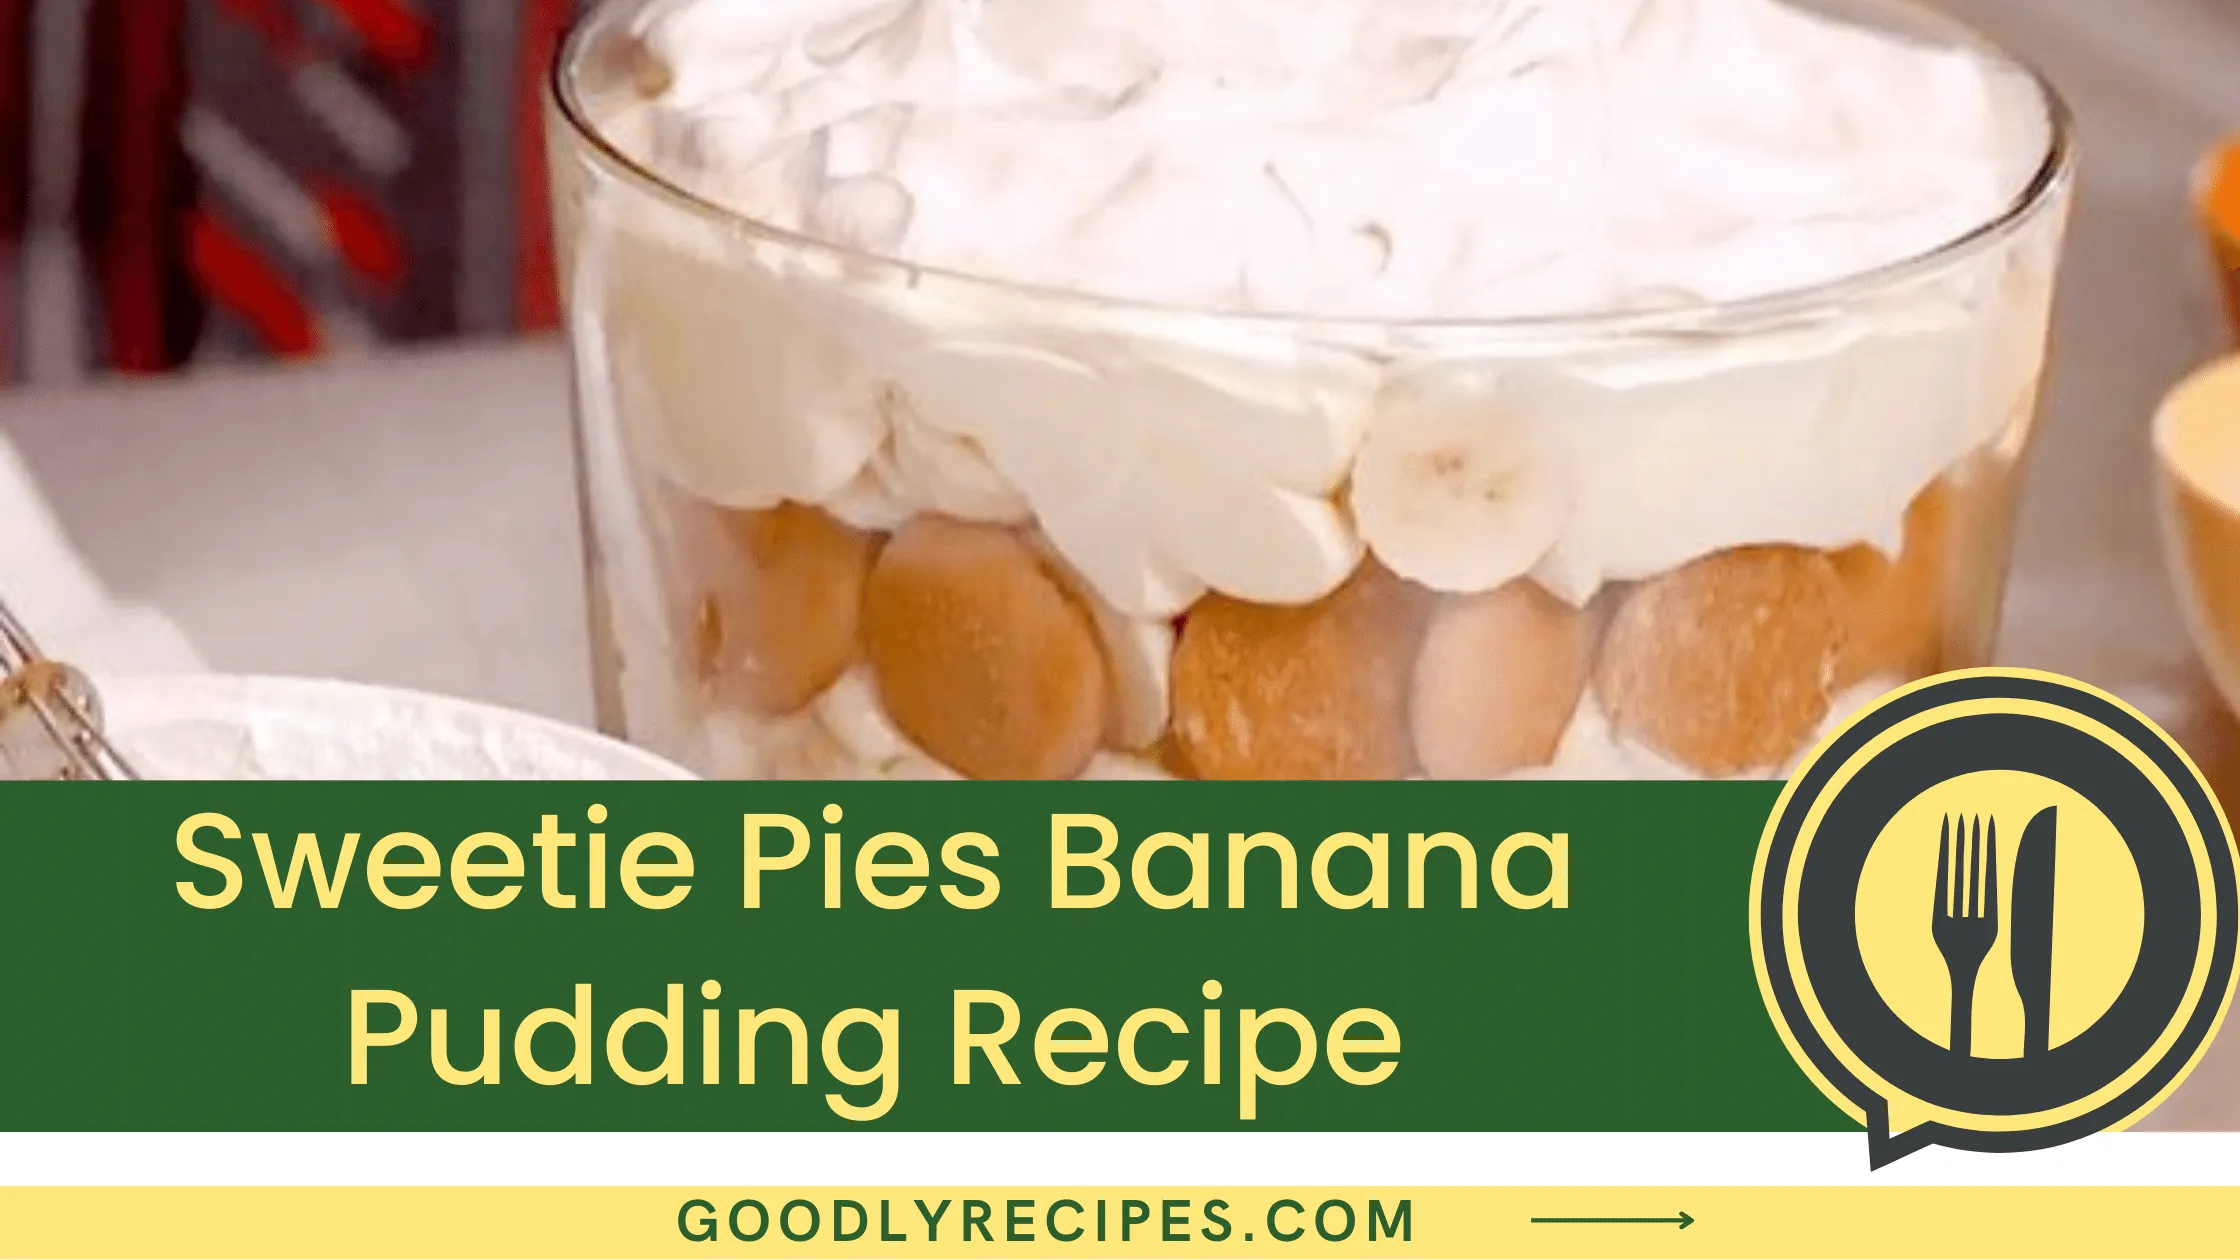 What Is Sweetie Pies Banana Pudding?